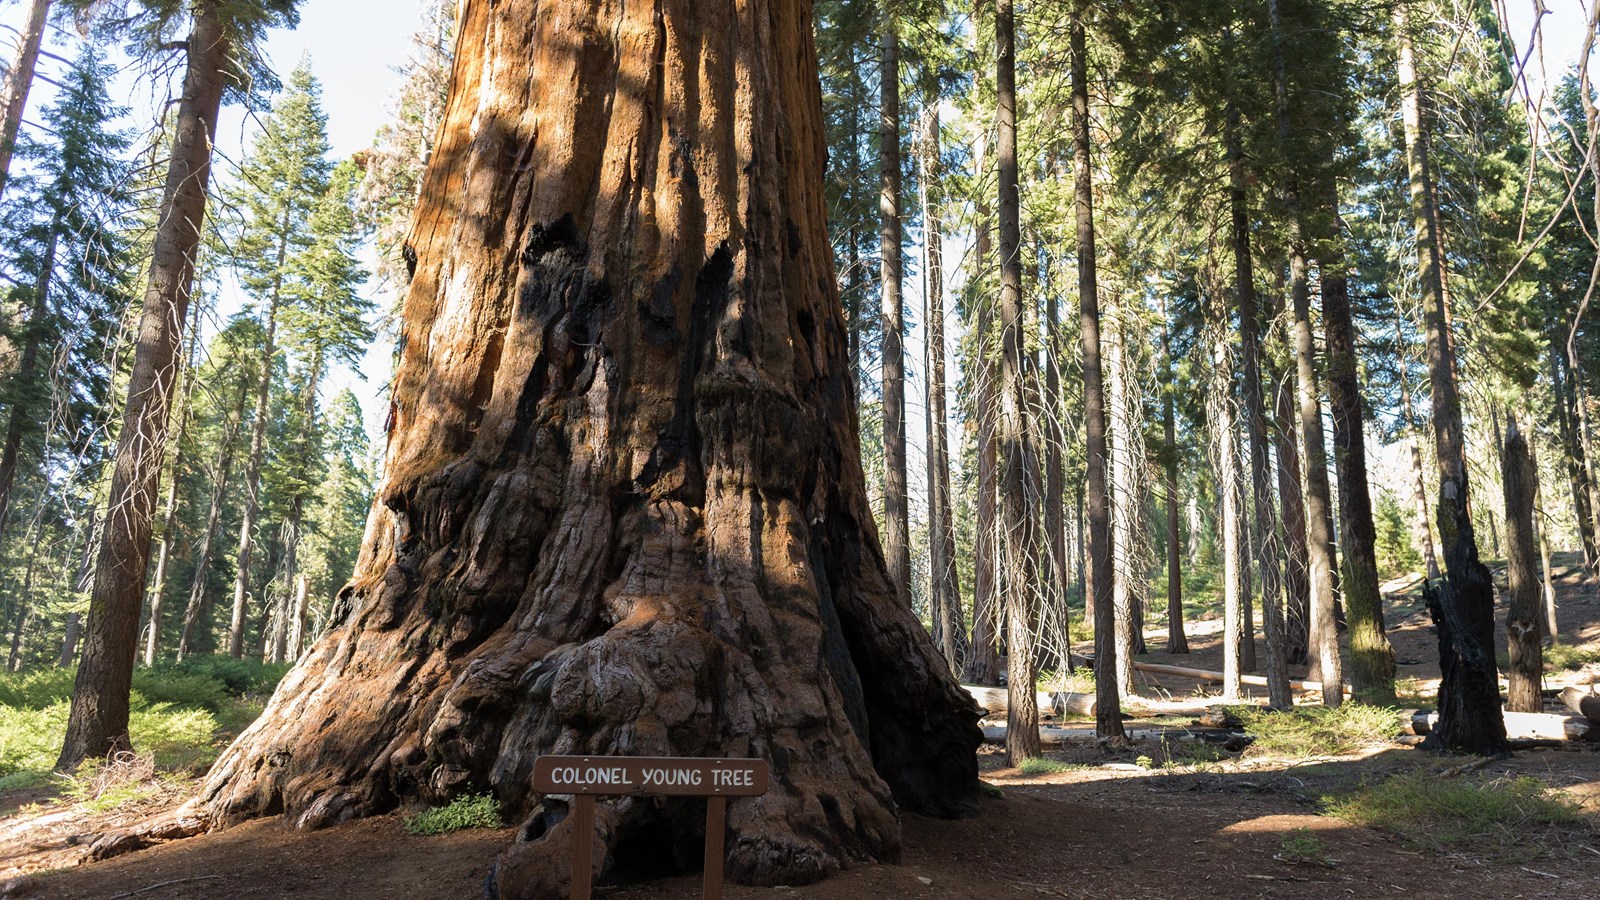 A giant sequoia named after Col. Charles Young